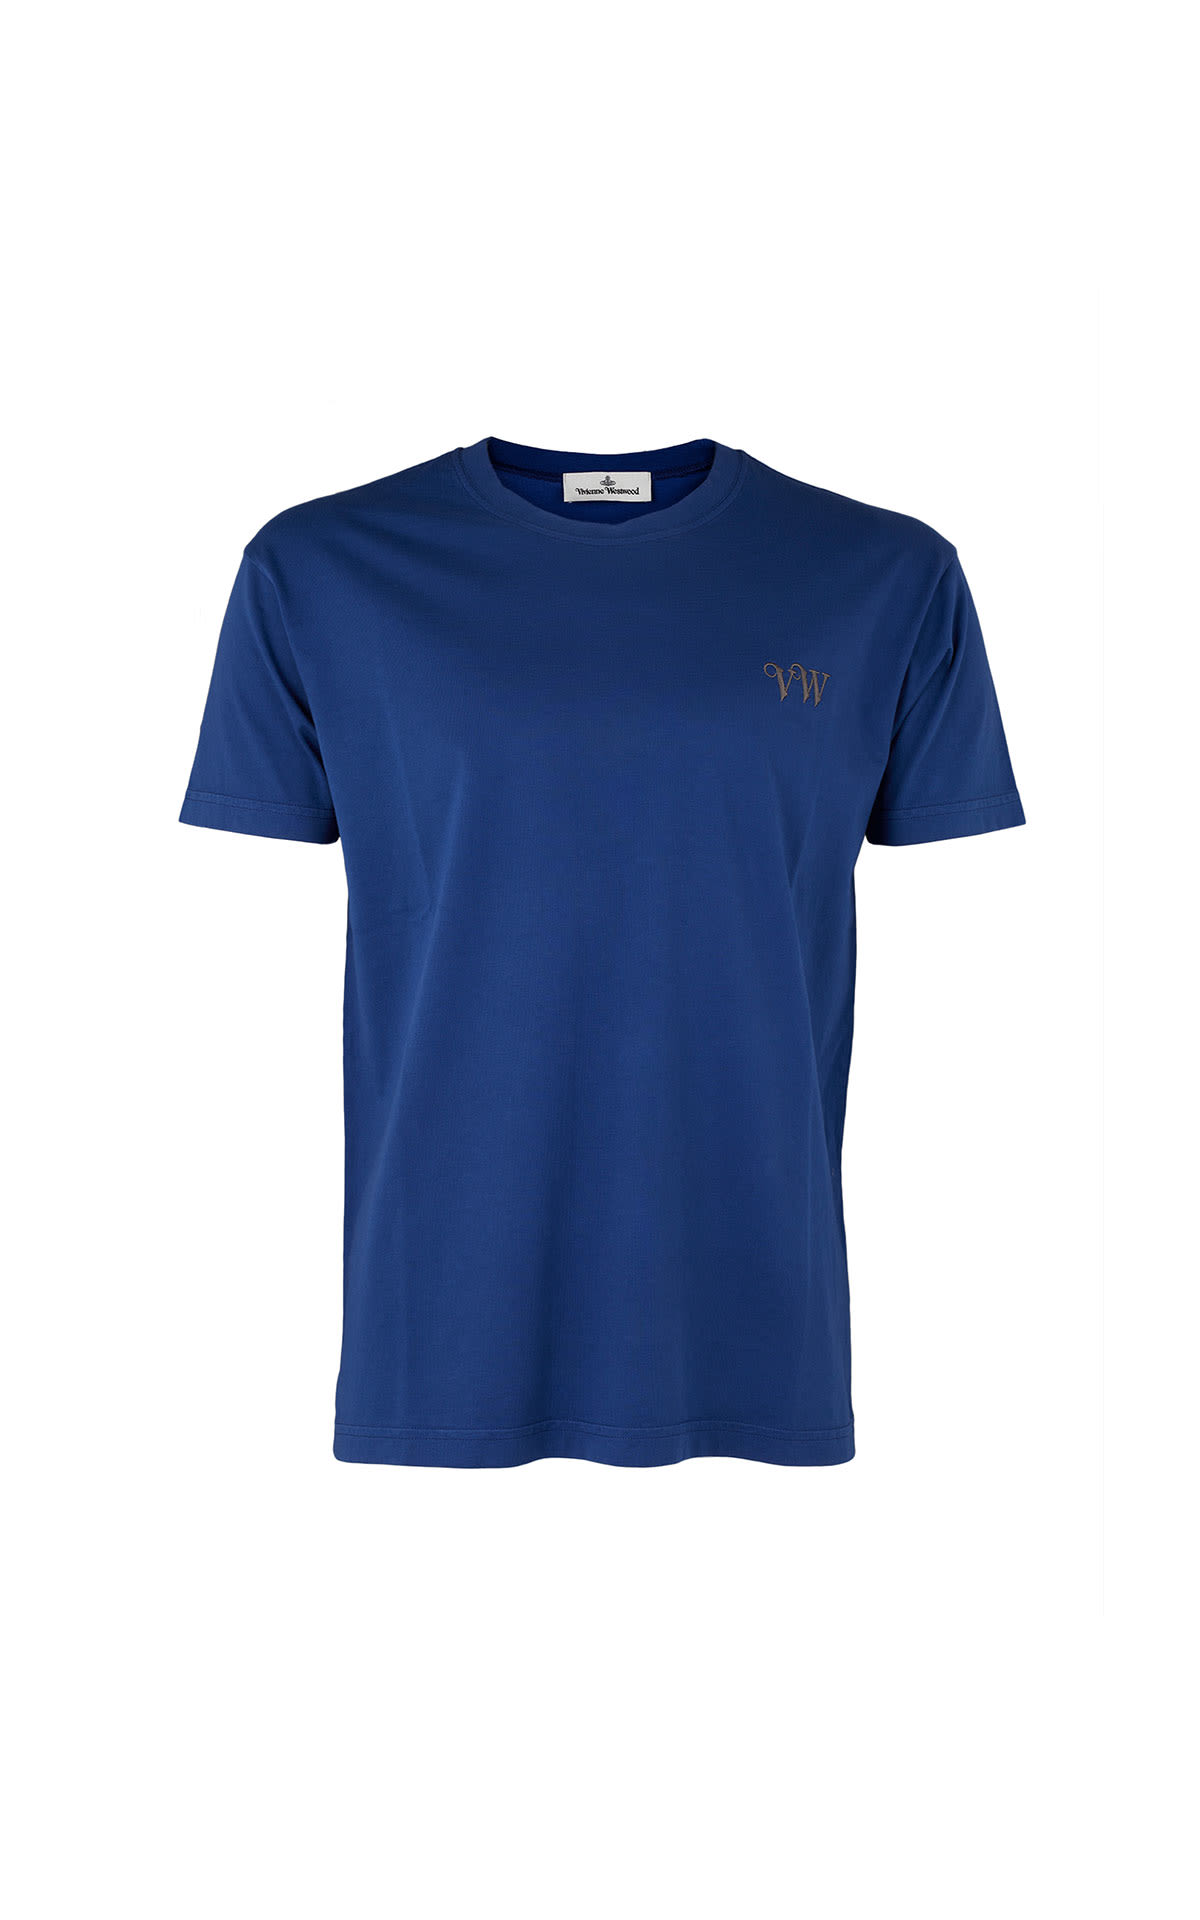 Vivienne Westwood VW classic t-shirt from Bicester Village